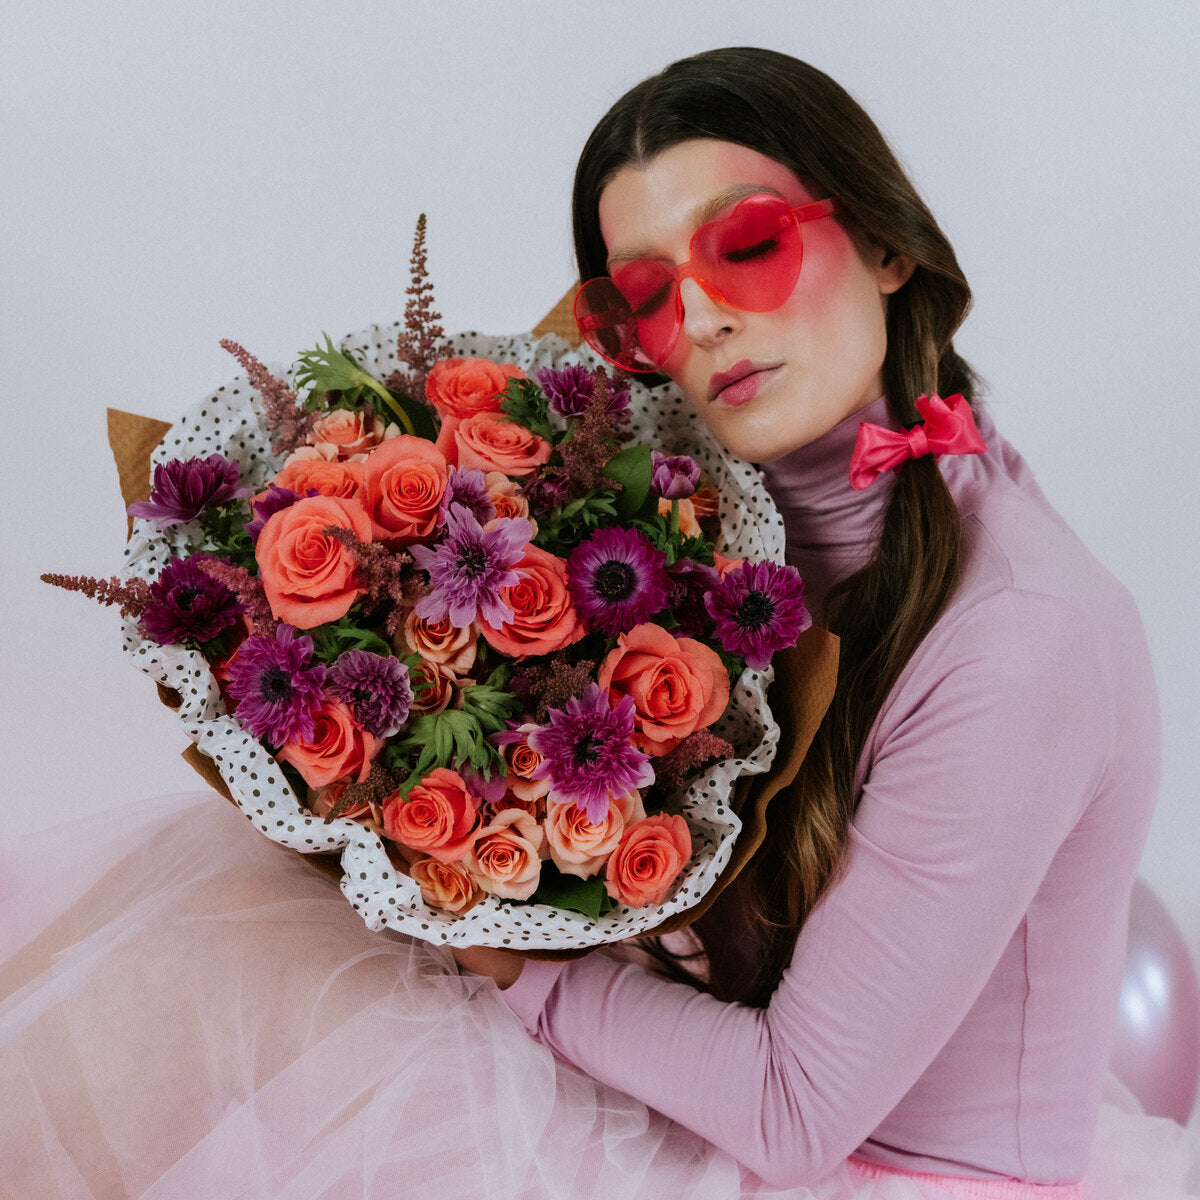 Bouquet of coral and pink flowers in the arms of a girl with glasses